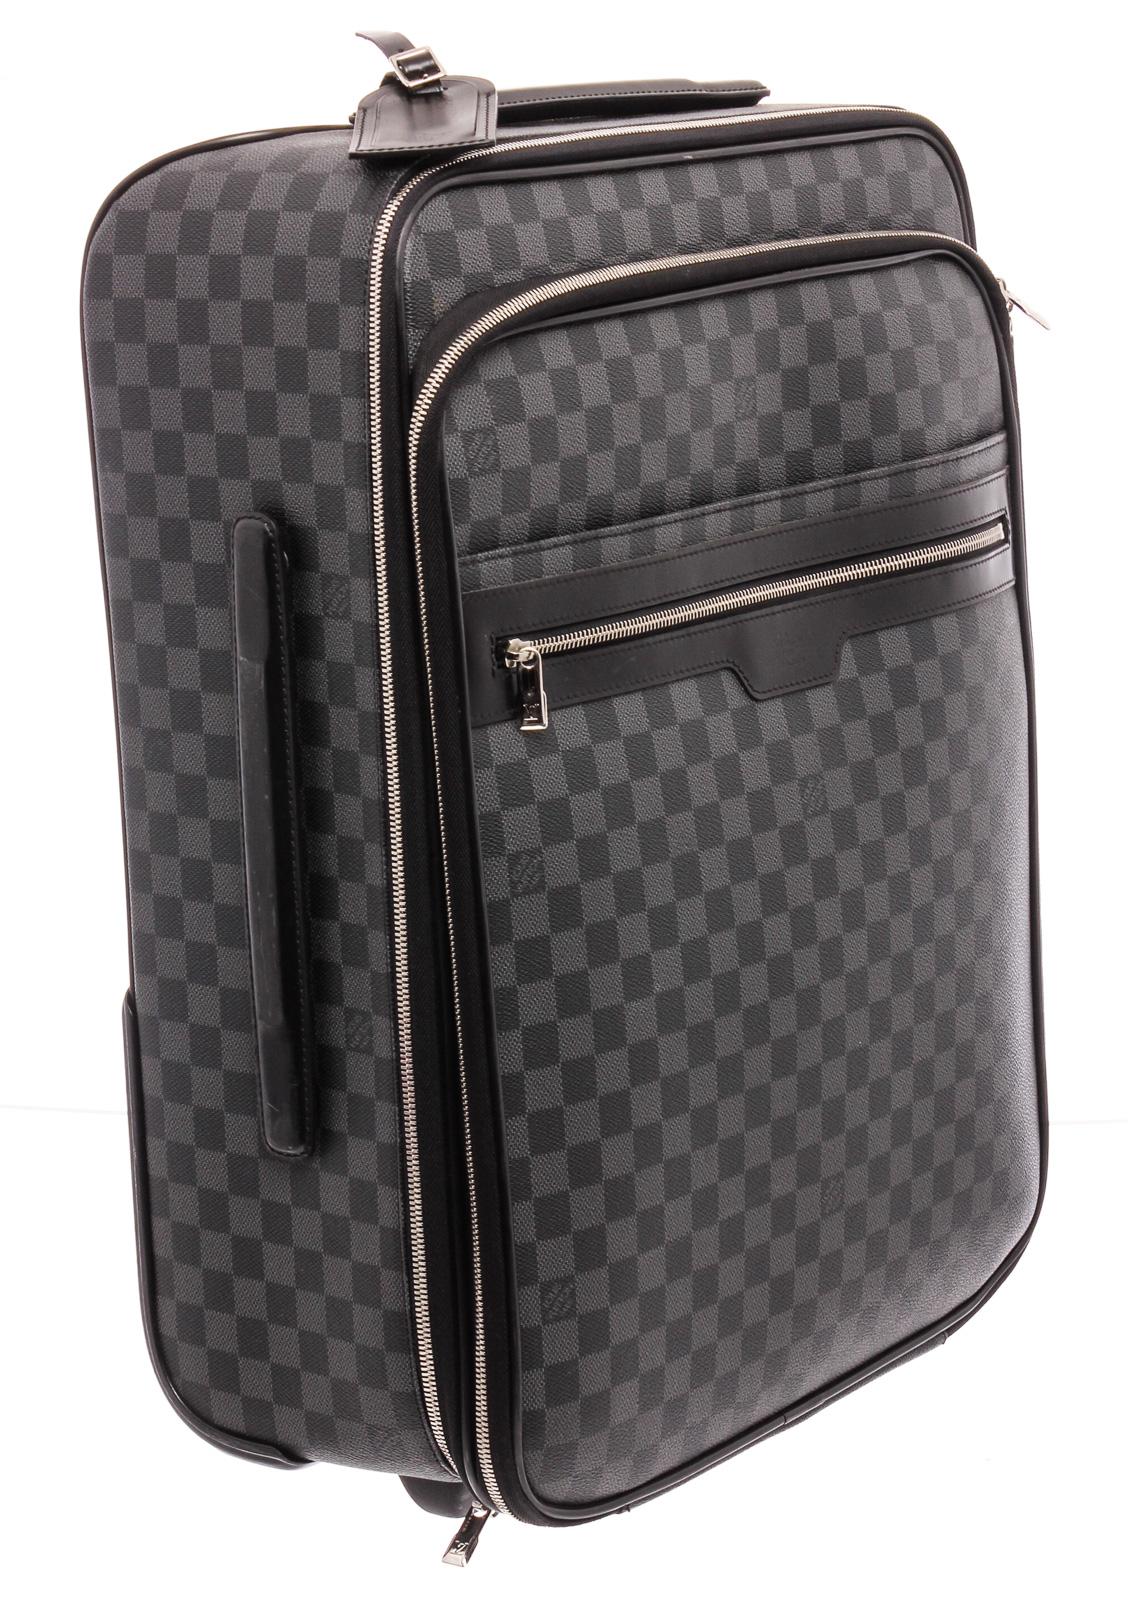 Damier Graphite coated canvas Louis Vuitton Pegase 55 with black Macassar leather trimmings, silver-tone hardware, retractable pull handle, zip pocket at front, dual wheels at base, two internal zip pockets with Velcro security strap, and two-way